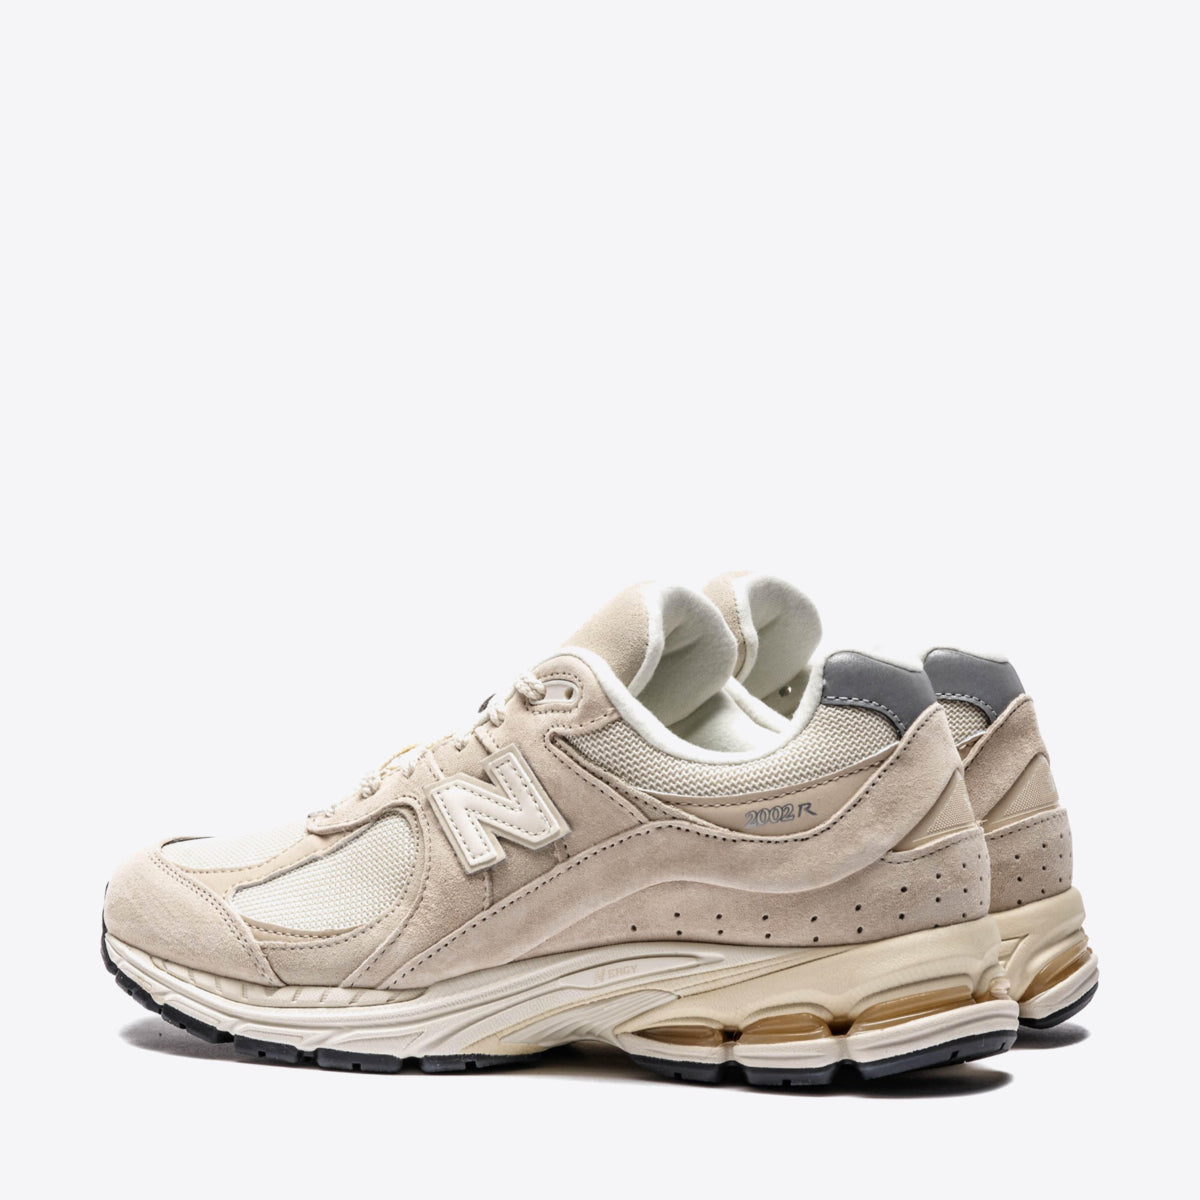 NEW BALANCE 2002R Sneaker Calm Taupe - Image 3